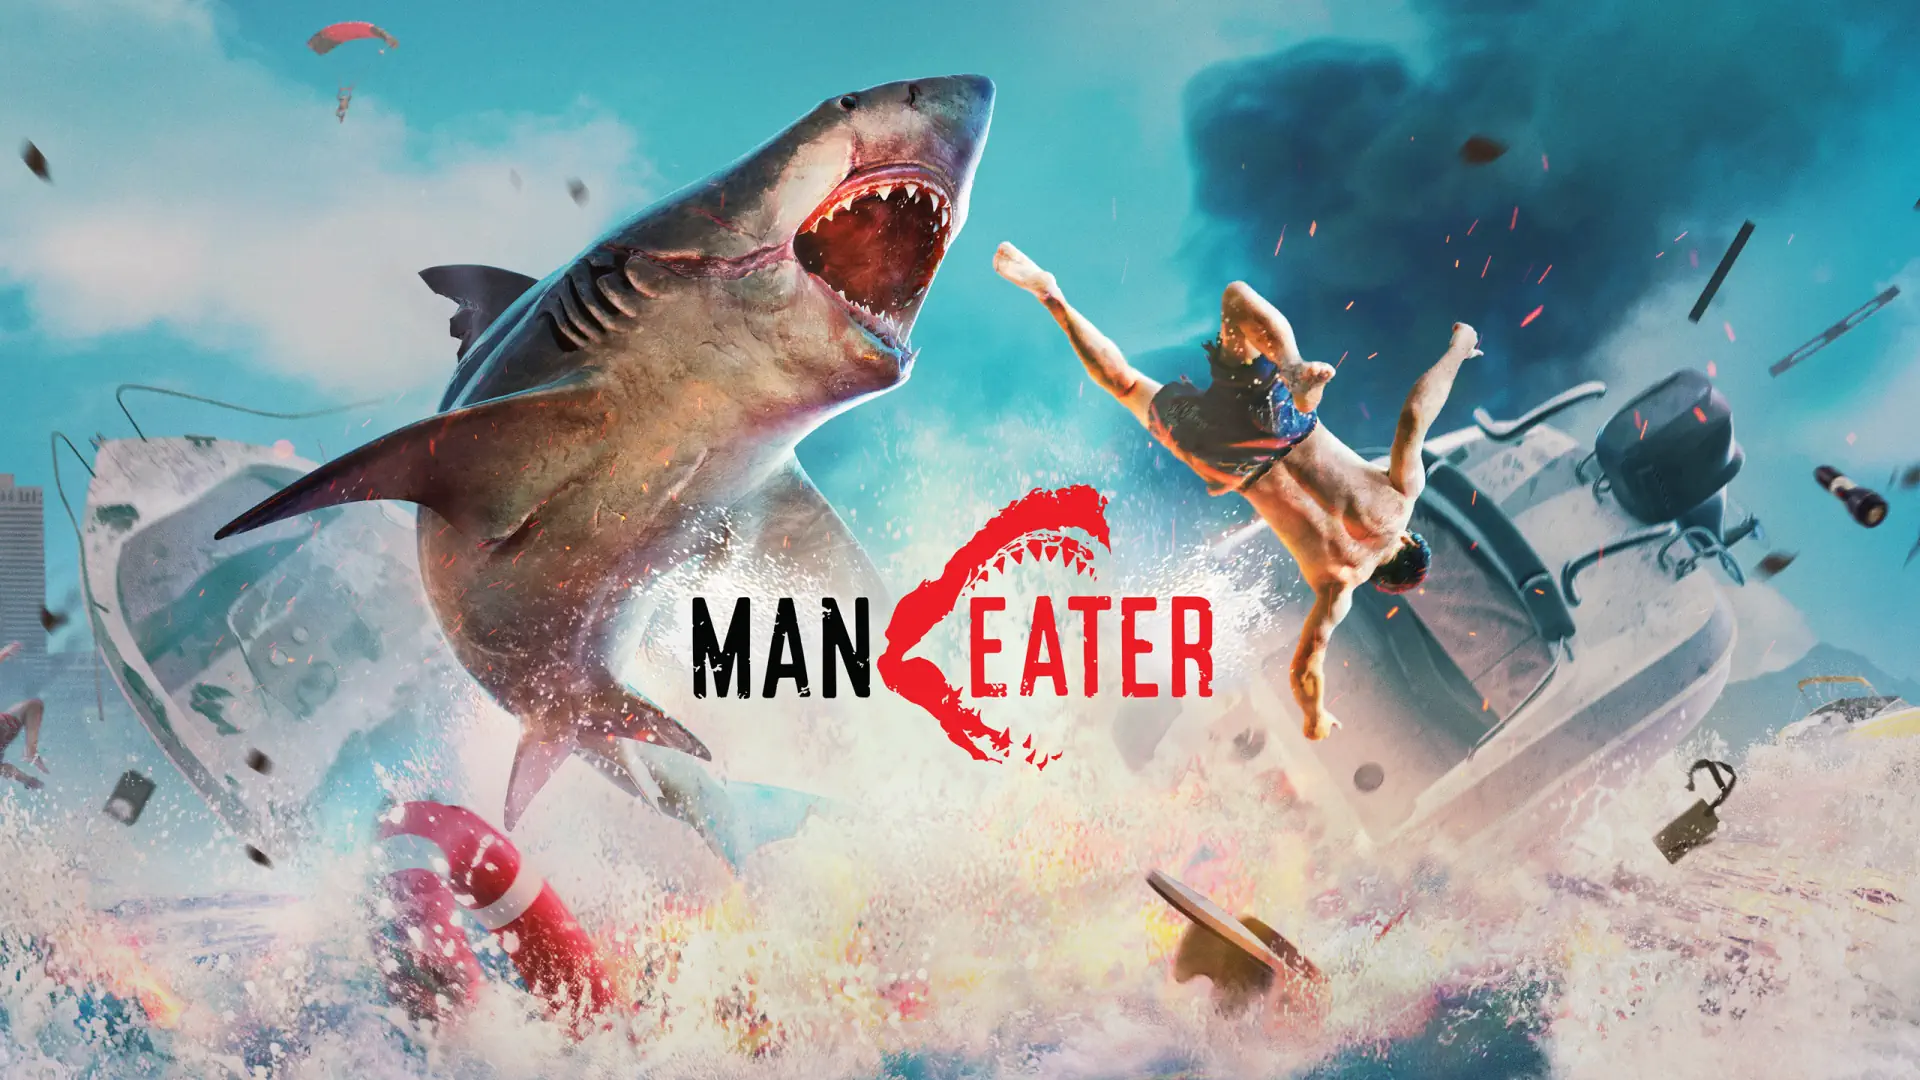 Maneater title image